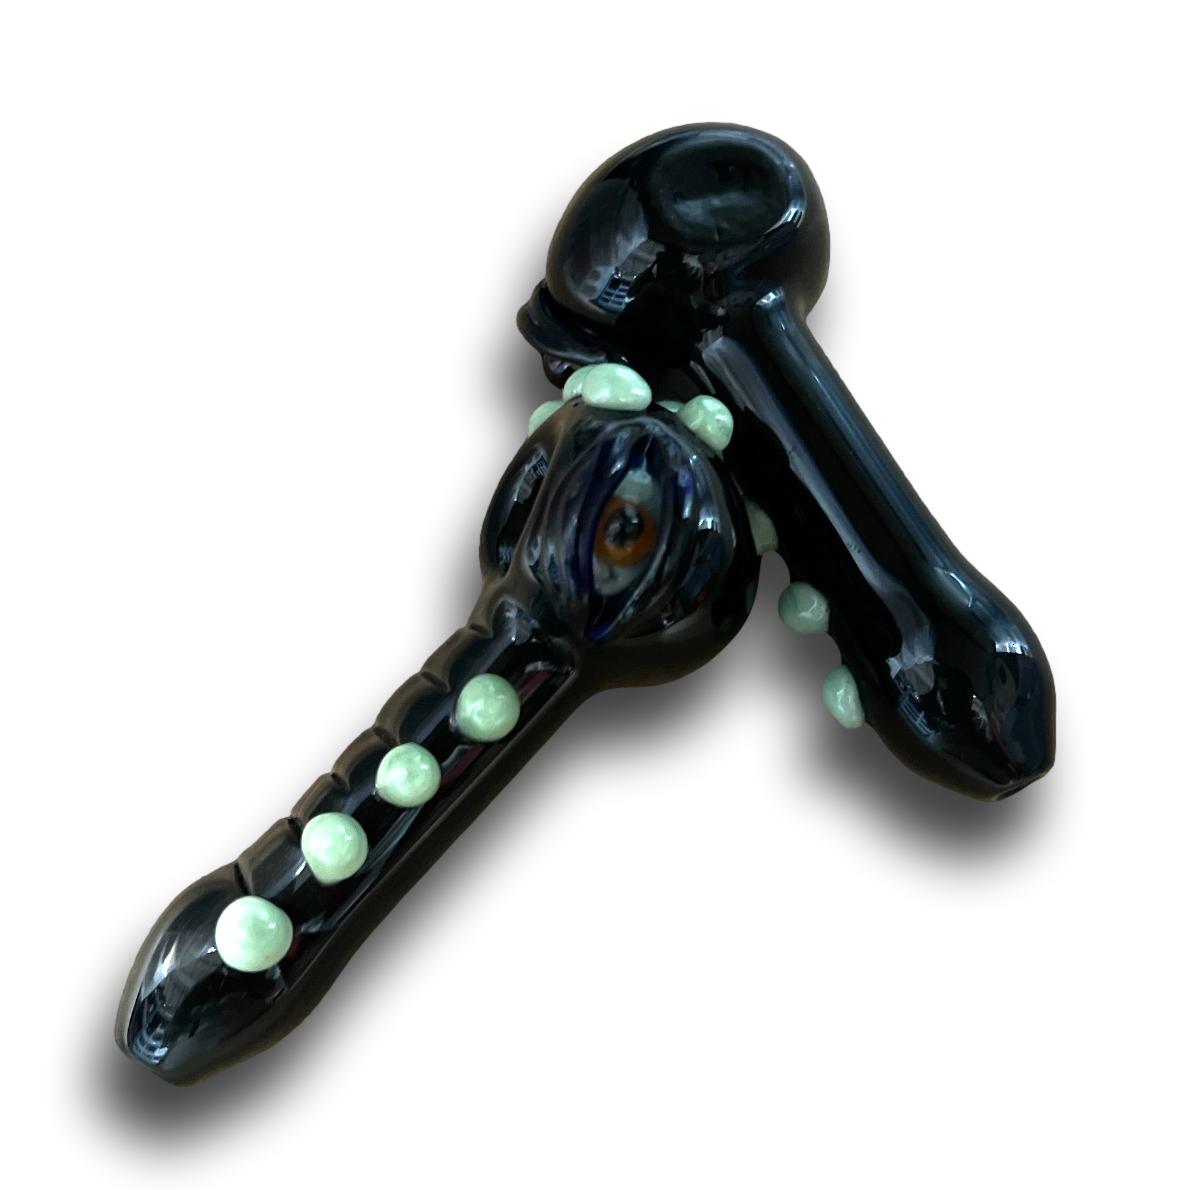 ntroducing the American-Made Dinosaur Bone Glass Pipe – a unique and artisanal smoking accessory that combines the rich history of dinosaurs with the artistry of glassblowing. Elevate your smoking experience with this handcrafted pipe featuring a distinctive design inspired by dinosaur bones.